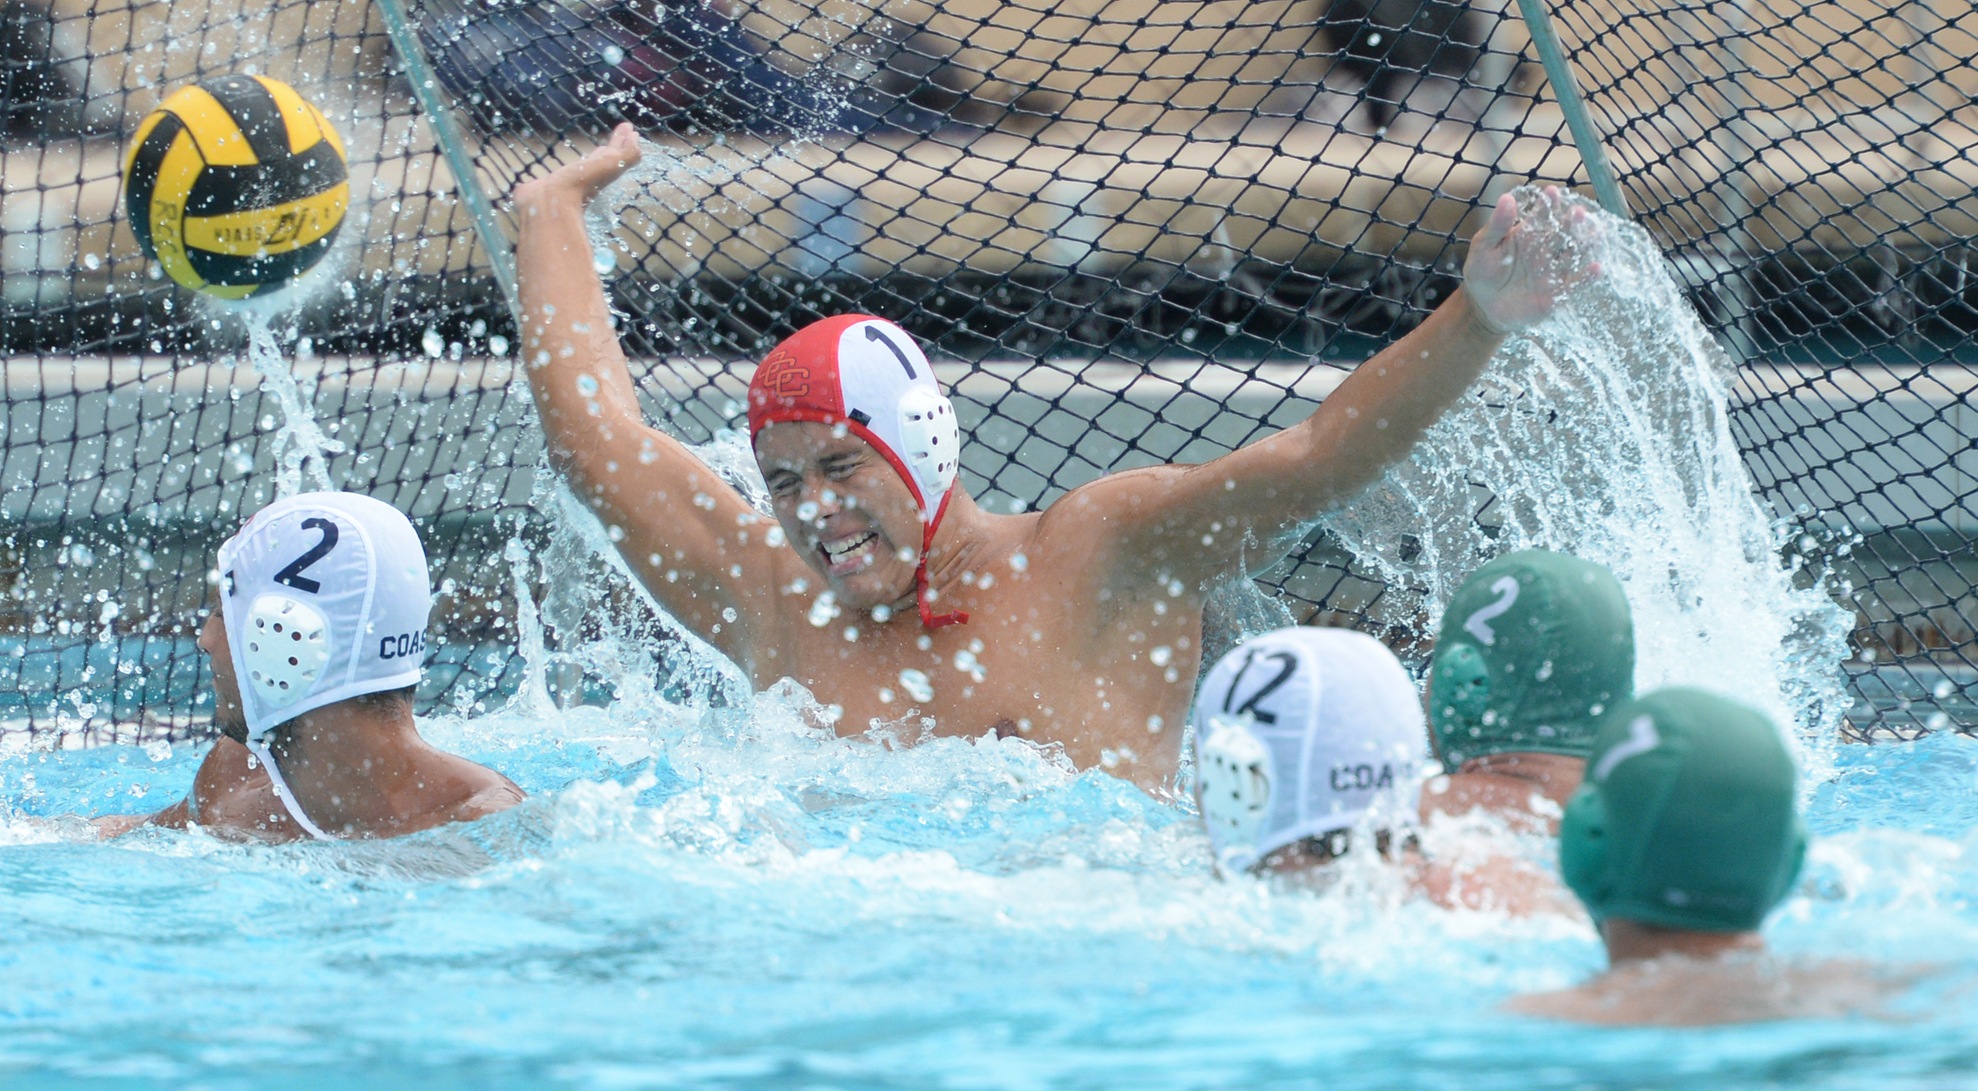 Pirates make quick work of Hornets, 19-8